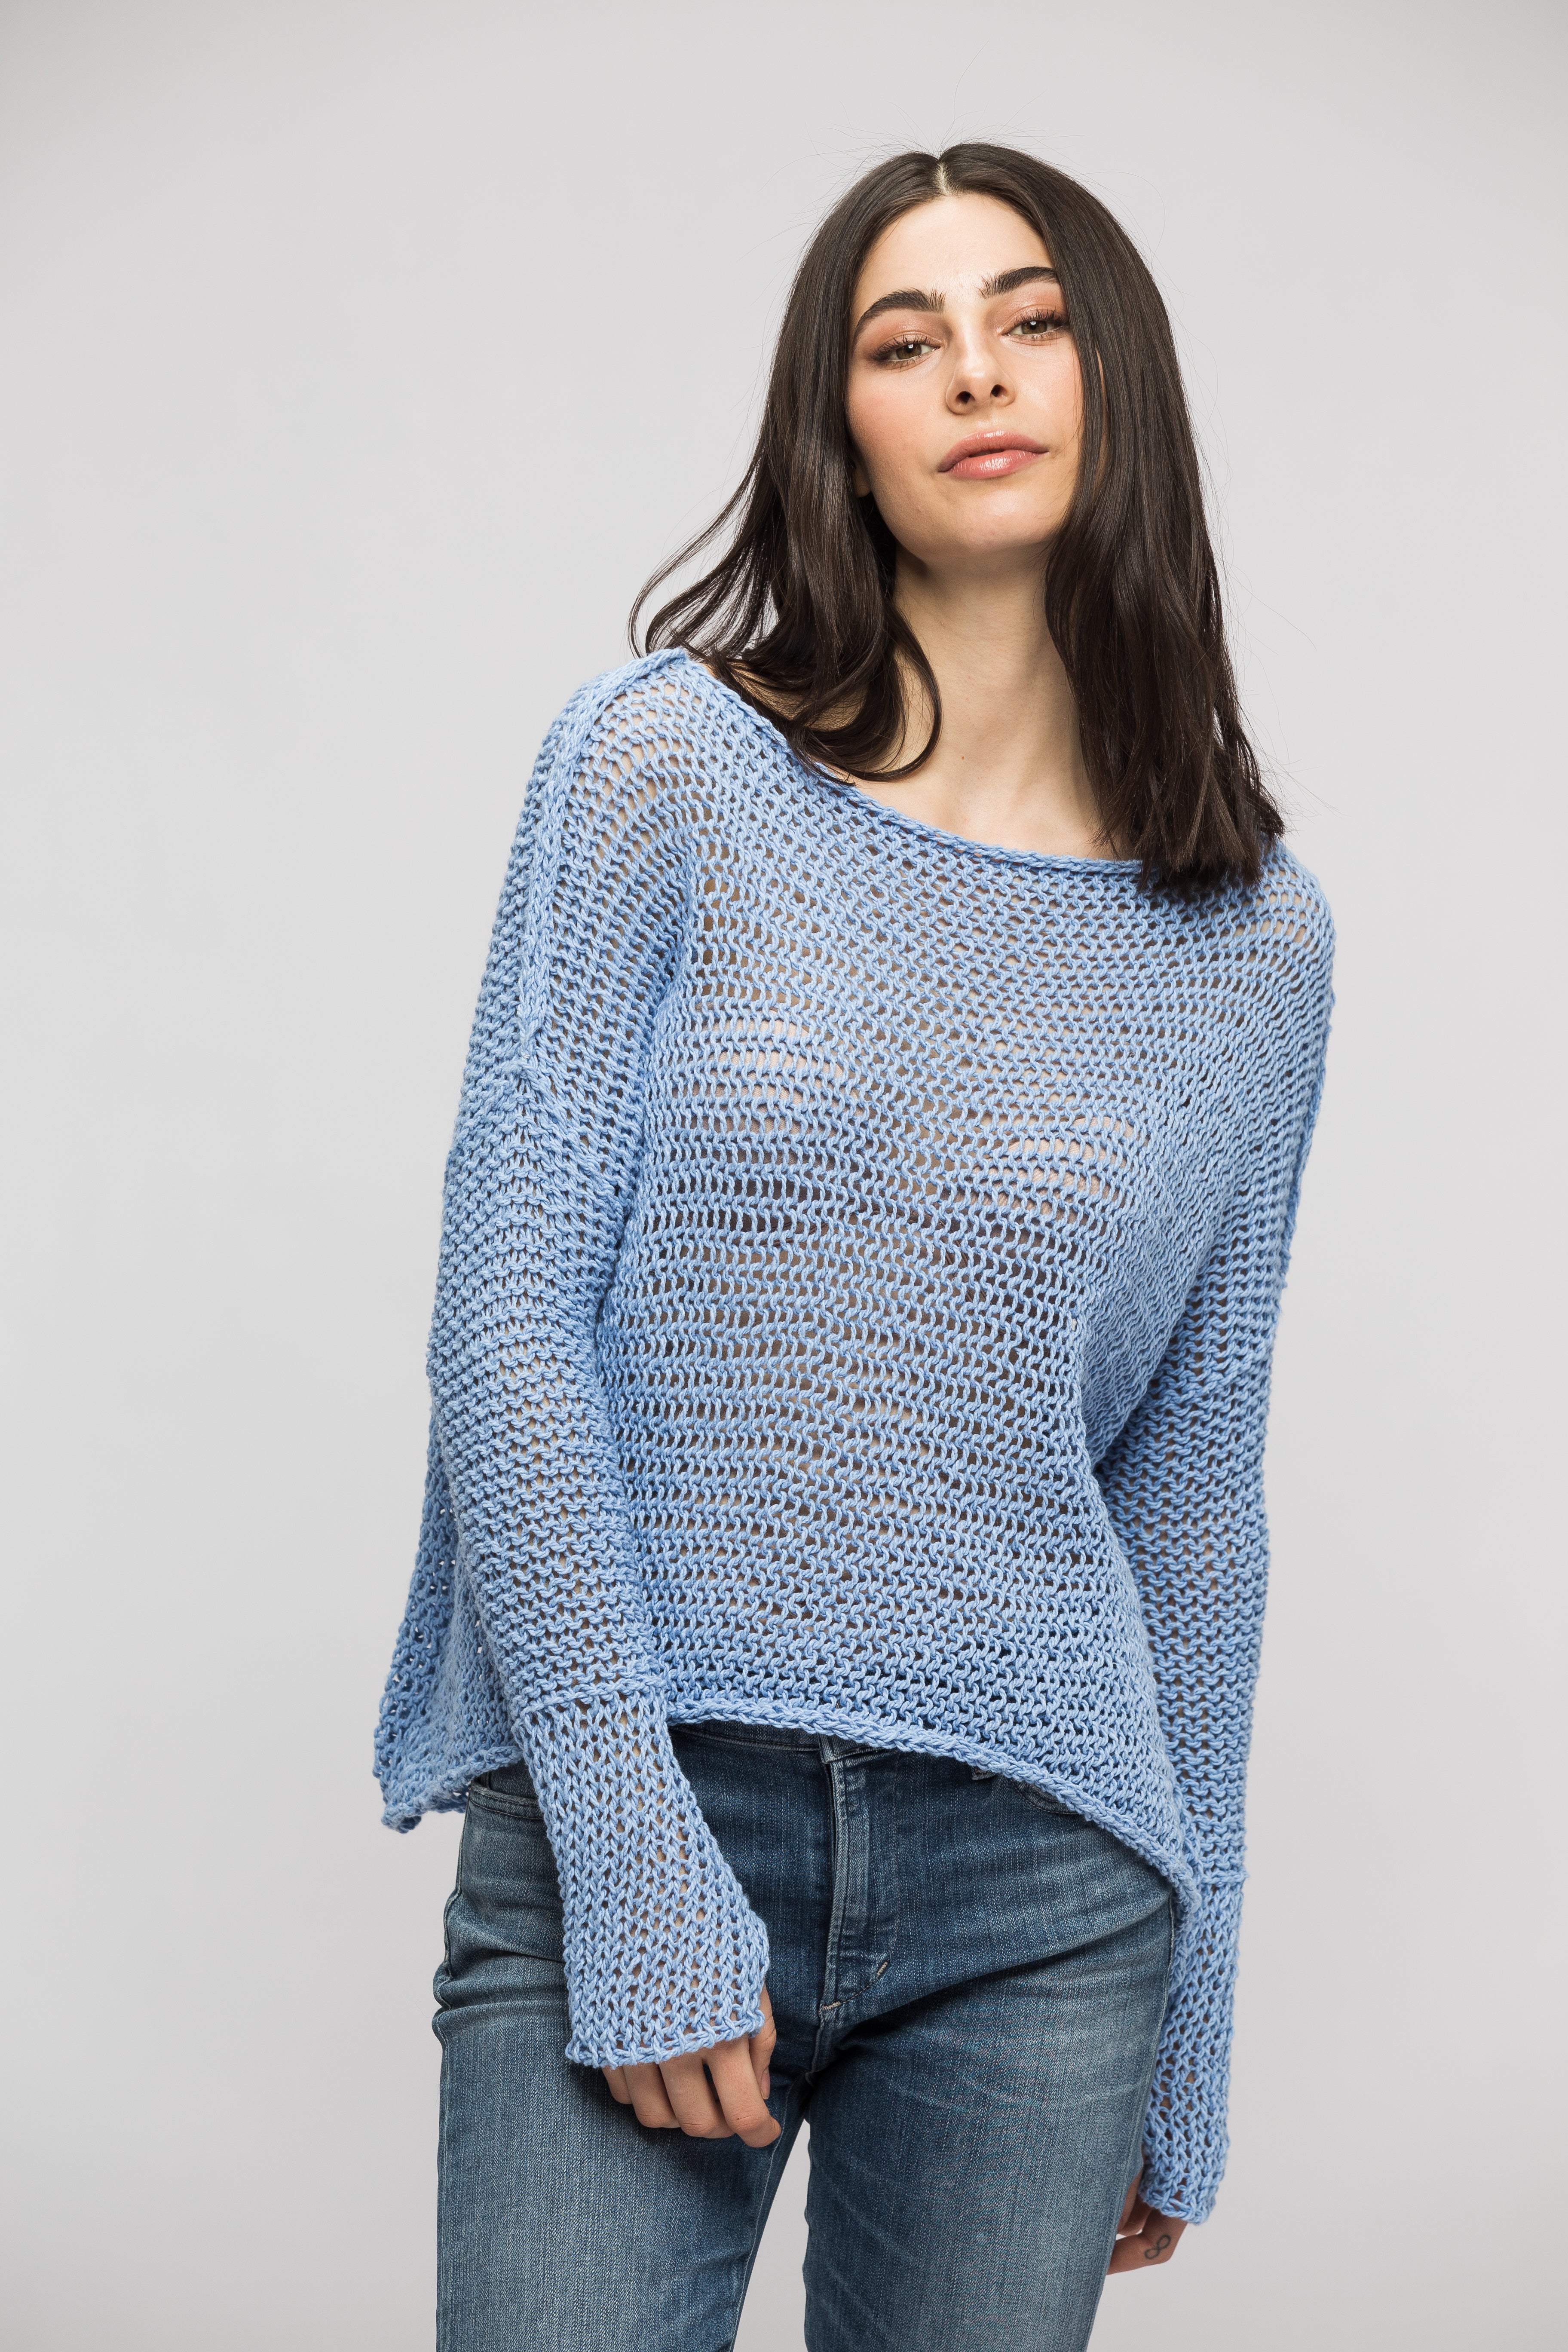 Cotton Linen Blend Blue Sweater - also in Cream / Beige / Black / Grey and Yellow